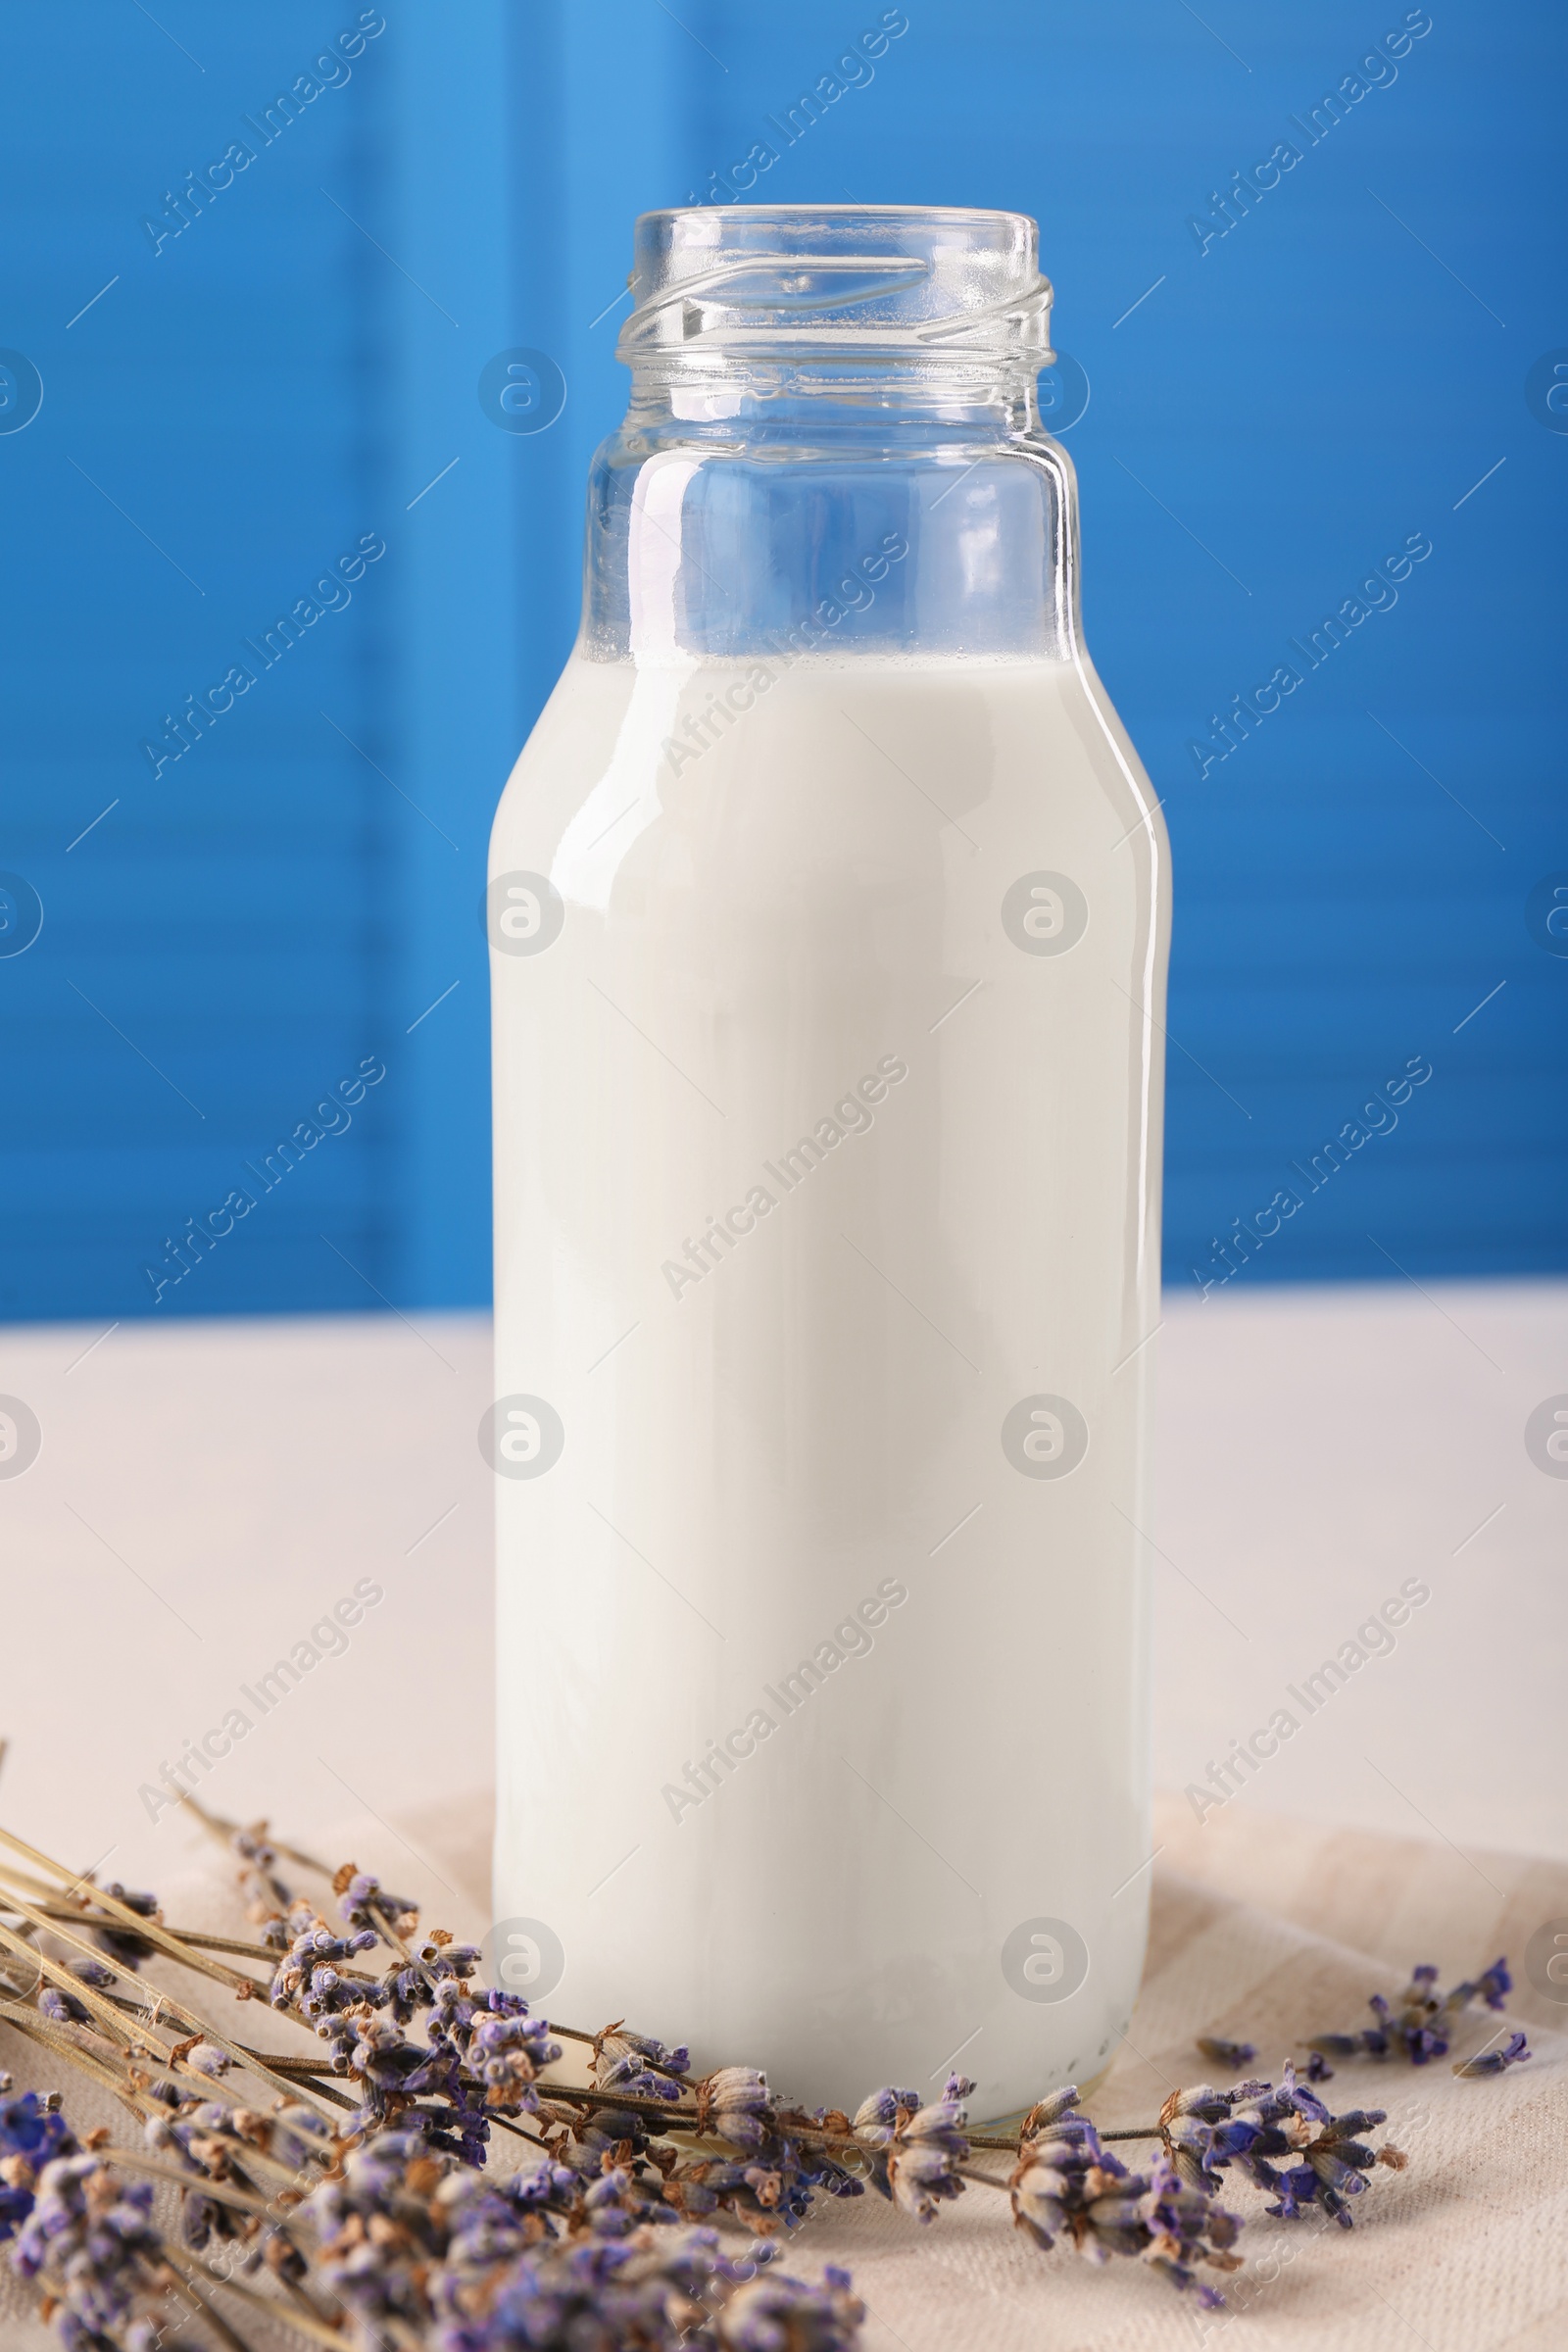 Photo of Bottle of tasty milk and lavender flowers on table against light blue wall, closeup